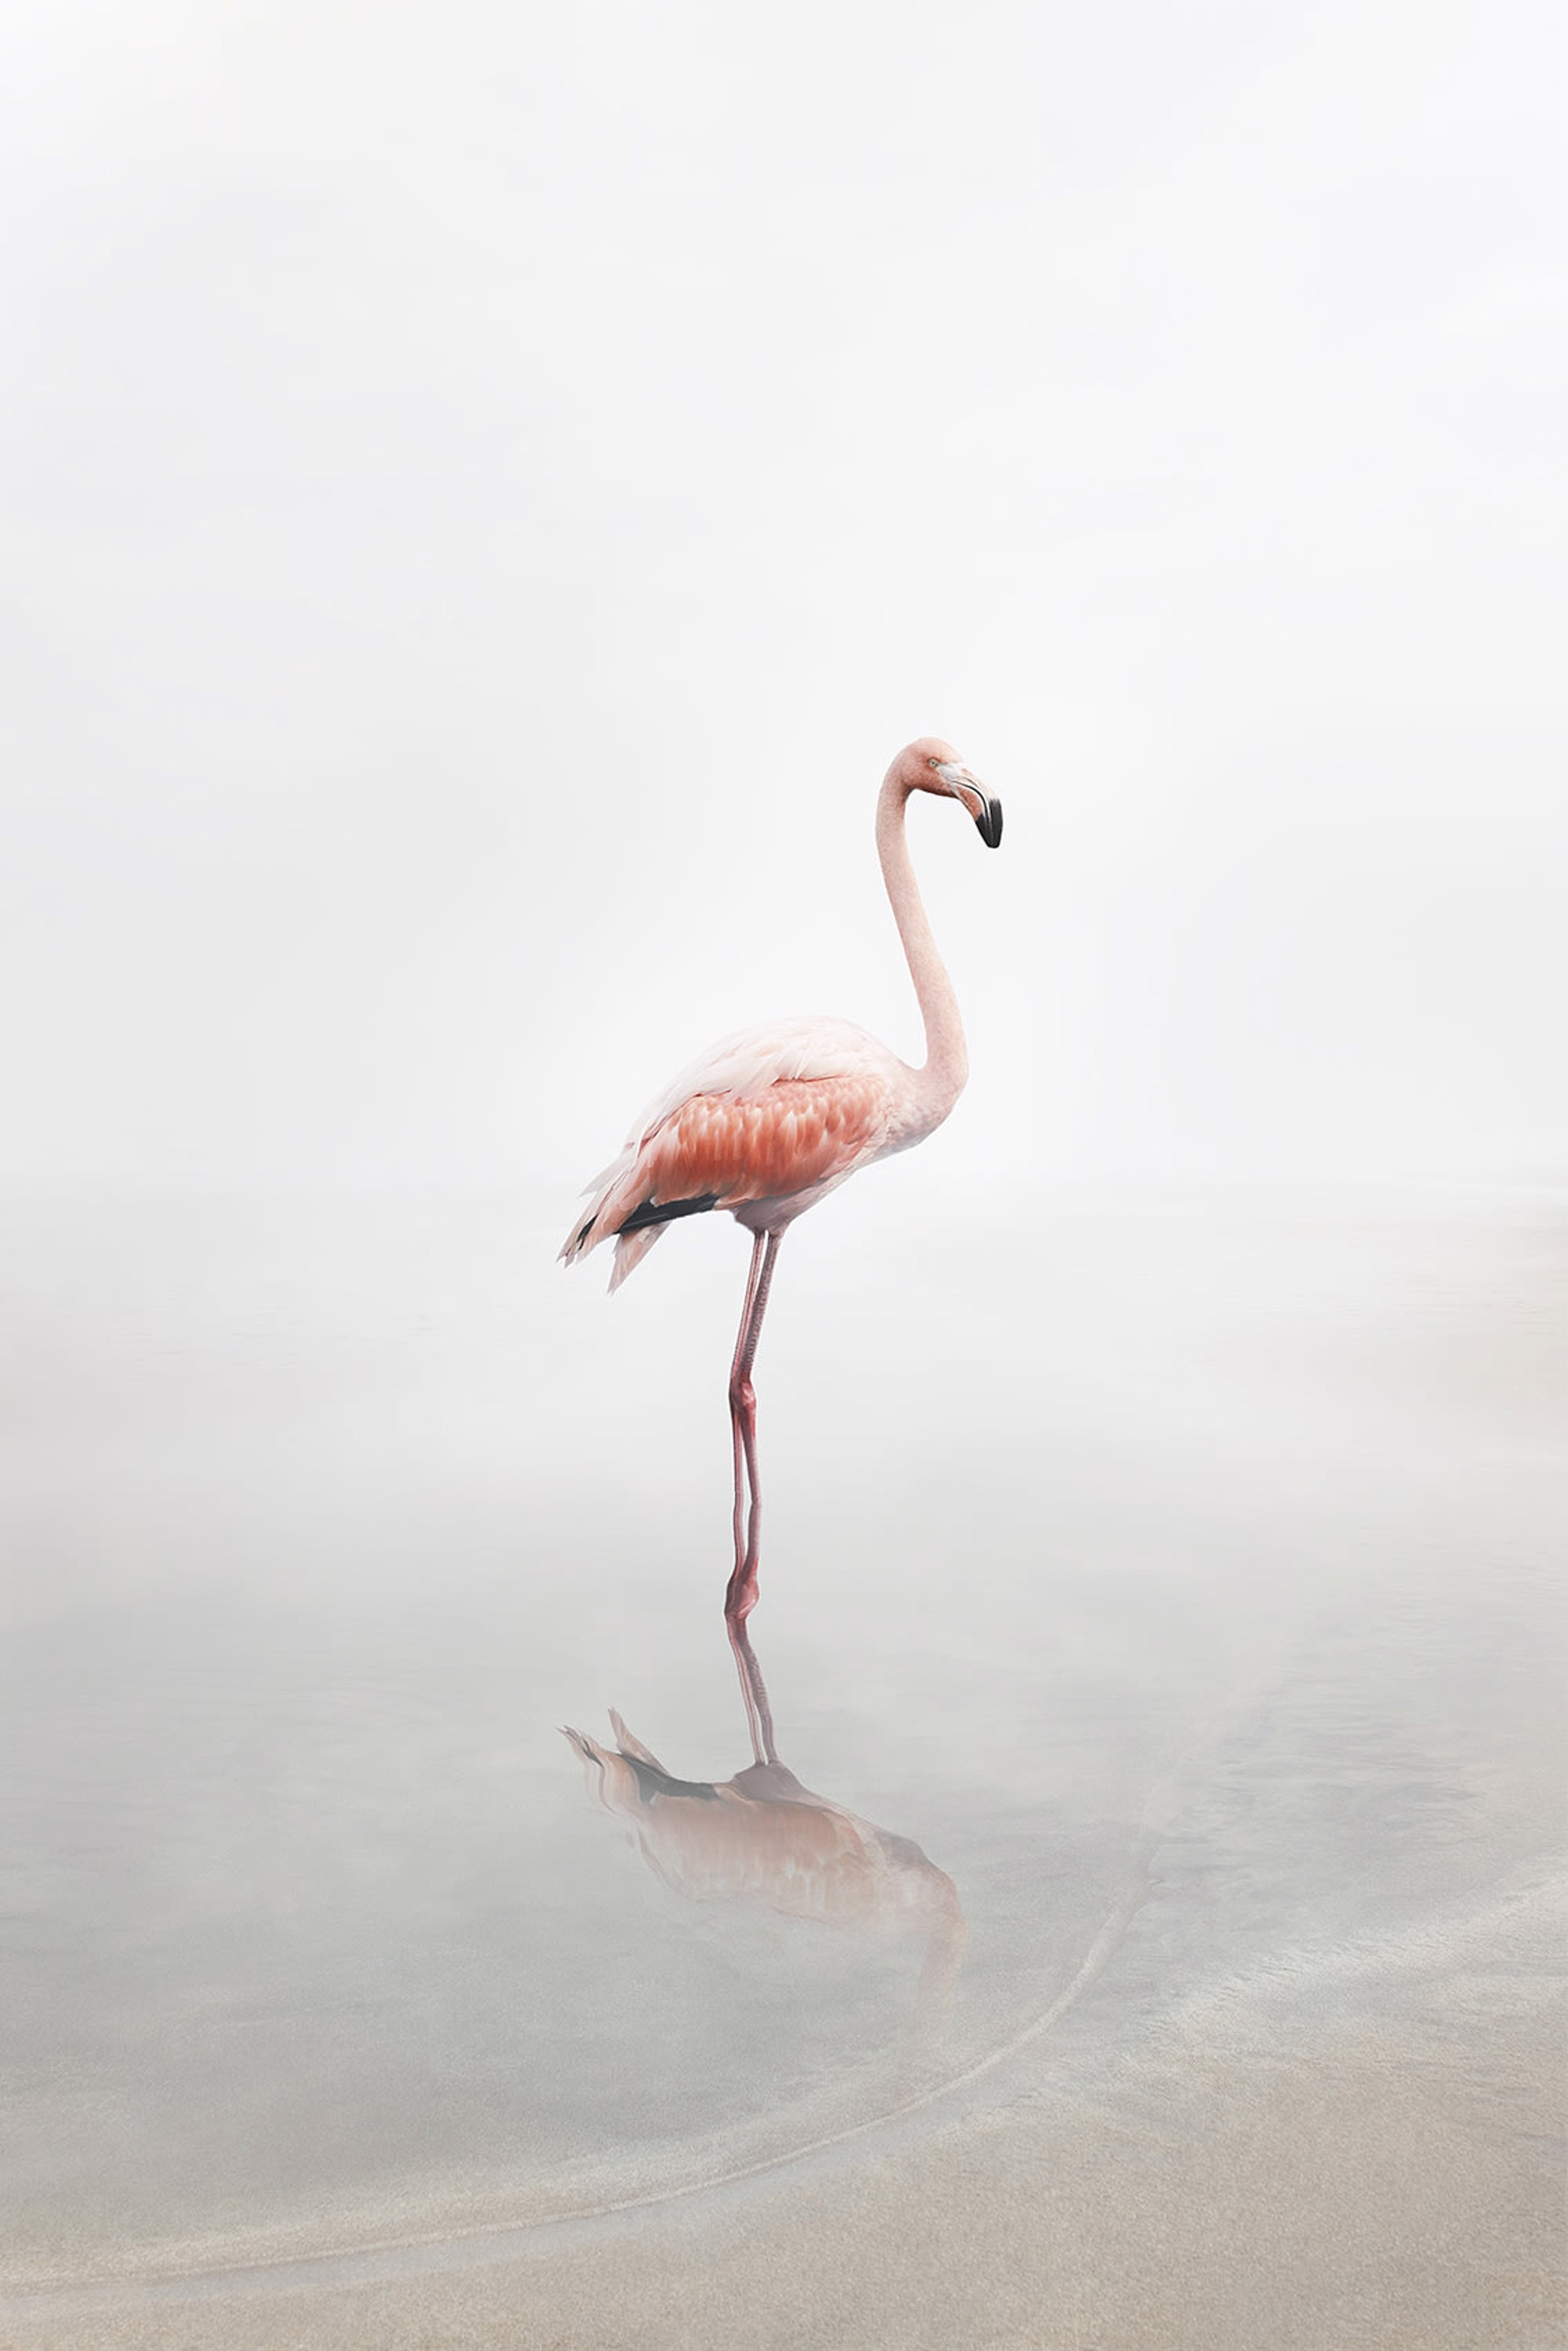 For Now Flamingo by Alice Zilberberg